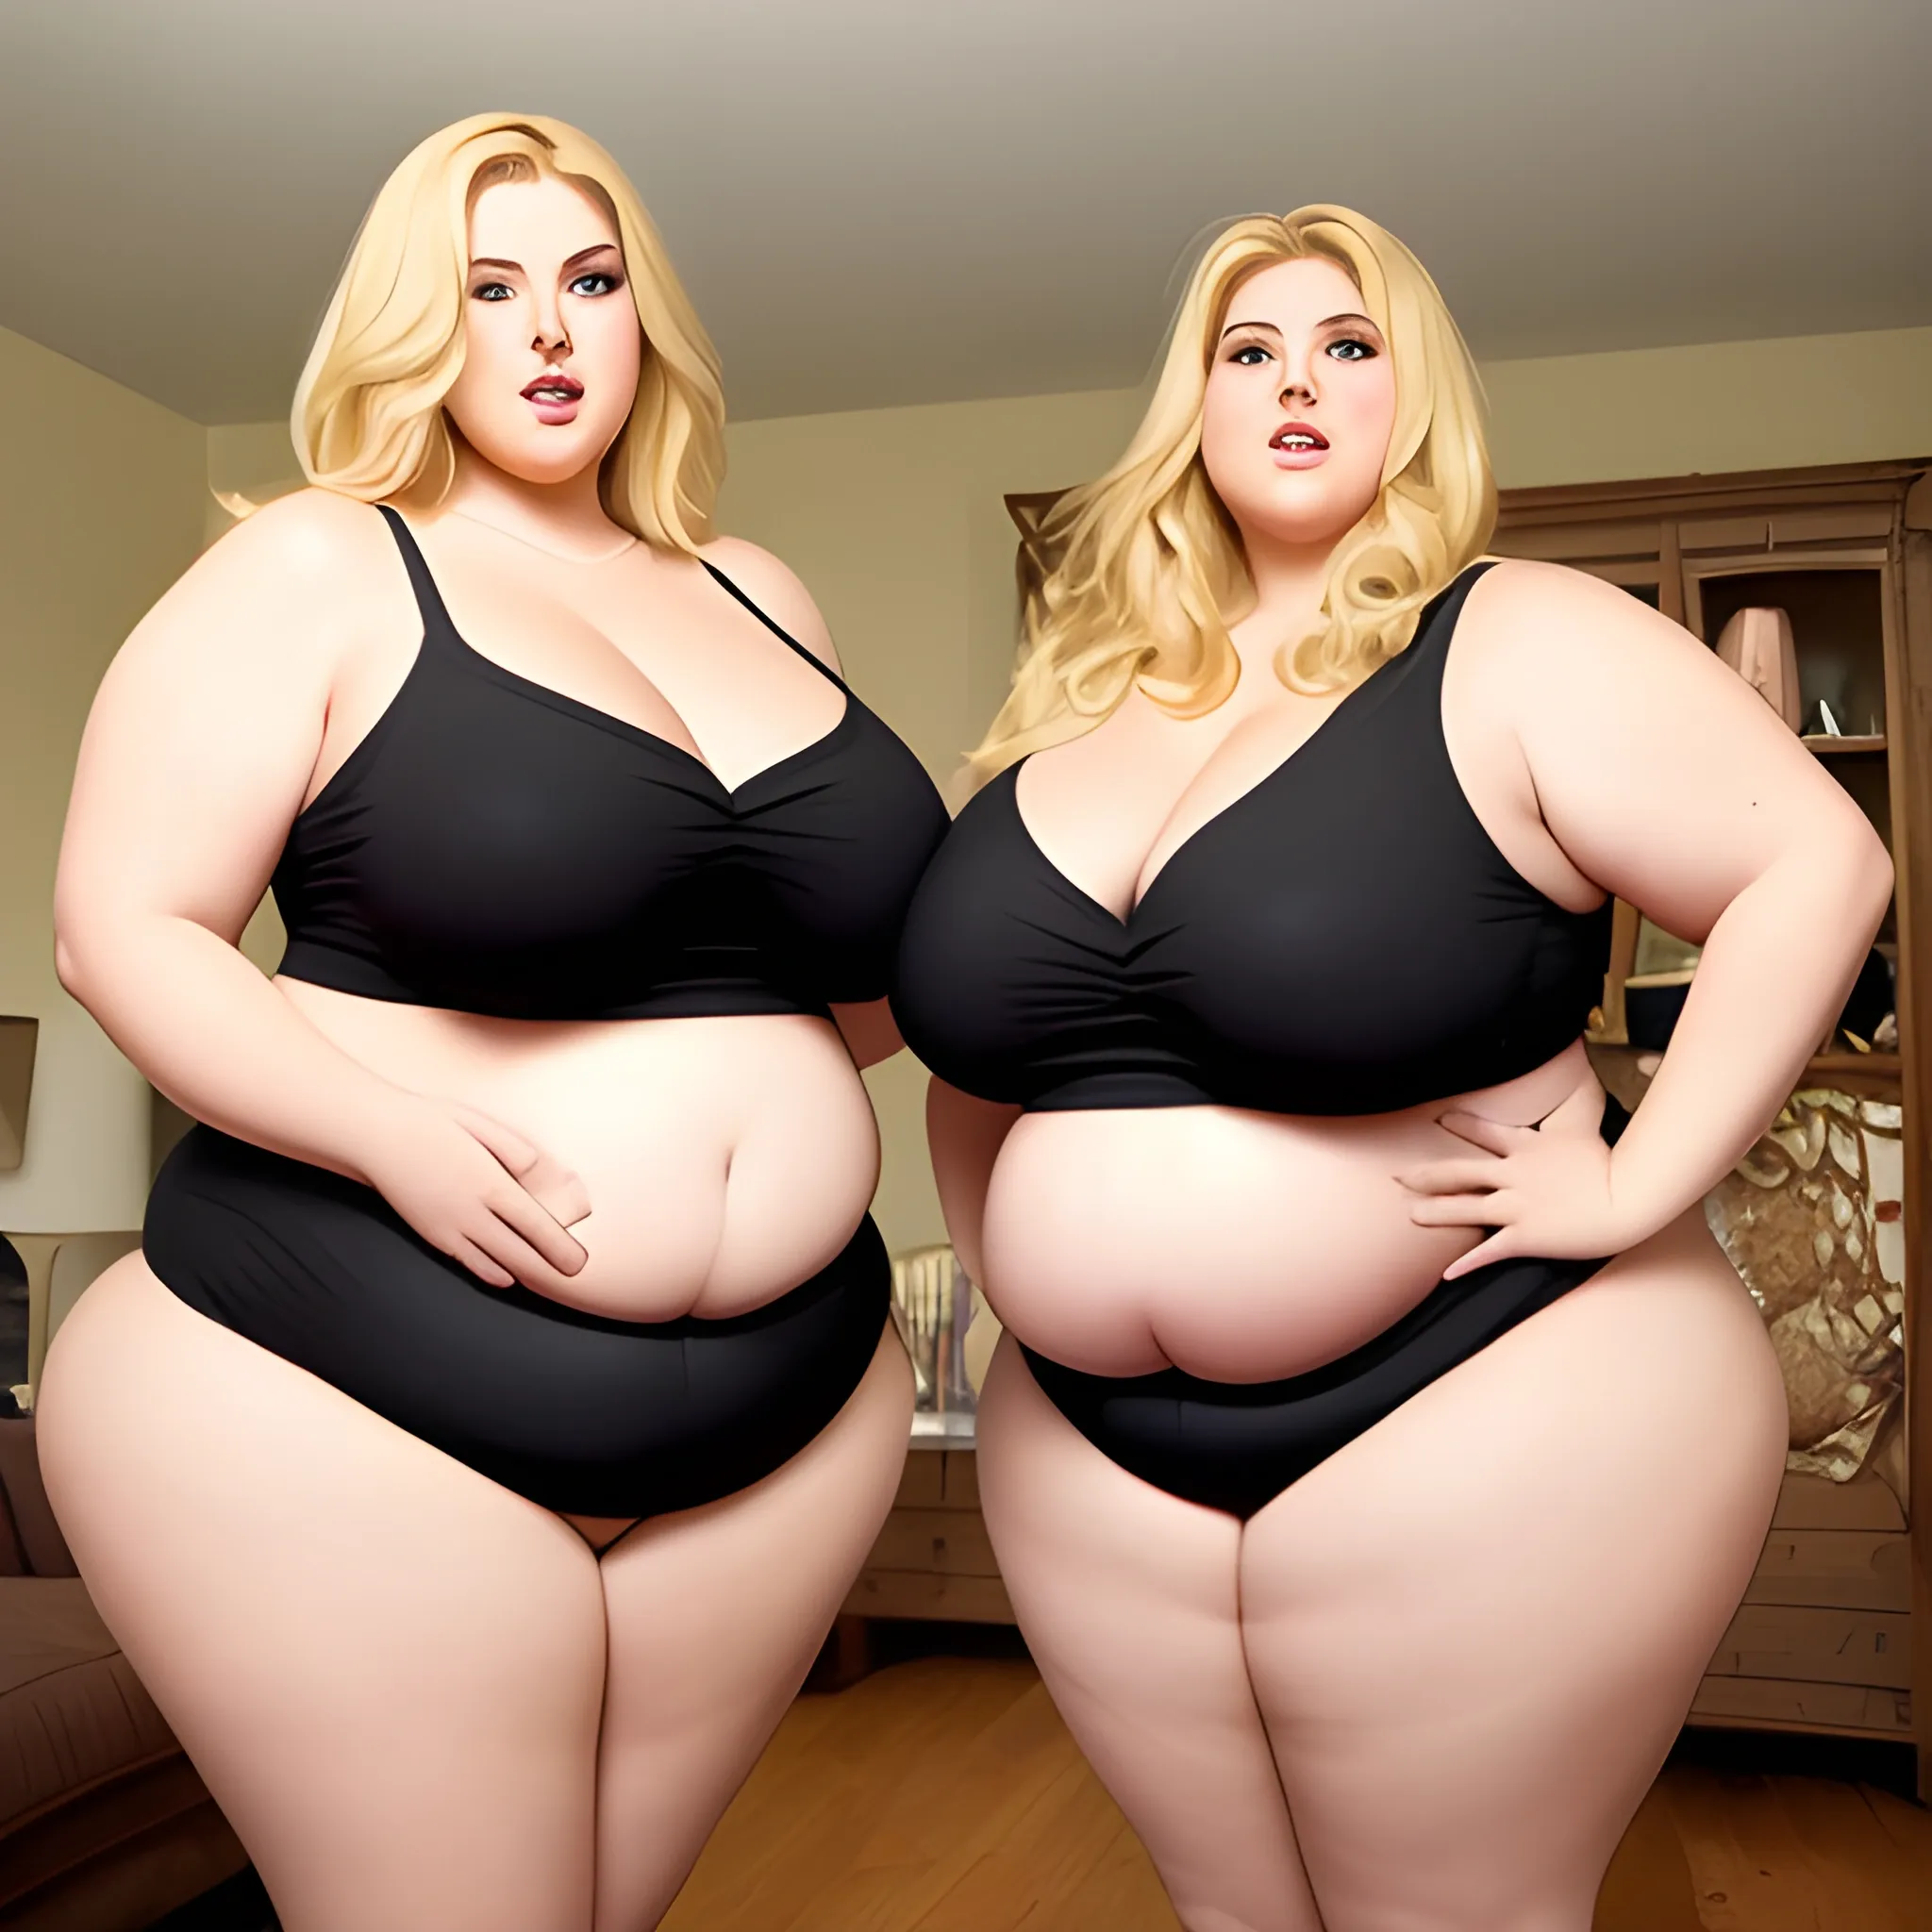 large and tall, very voluptuous, full-figured blonde woman who has a chubby fat round belly and very wide hips and very large thighs. Her twin who is thinner is standing next to her in the living room